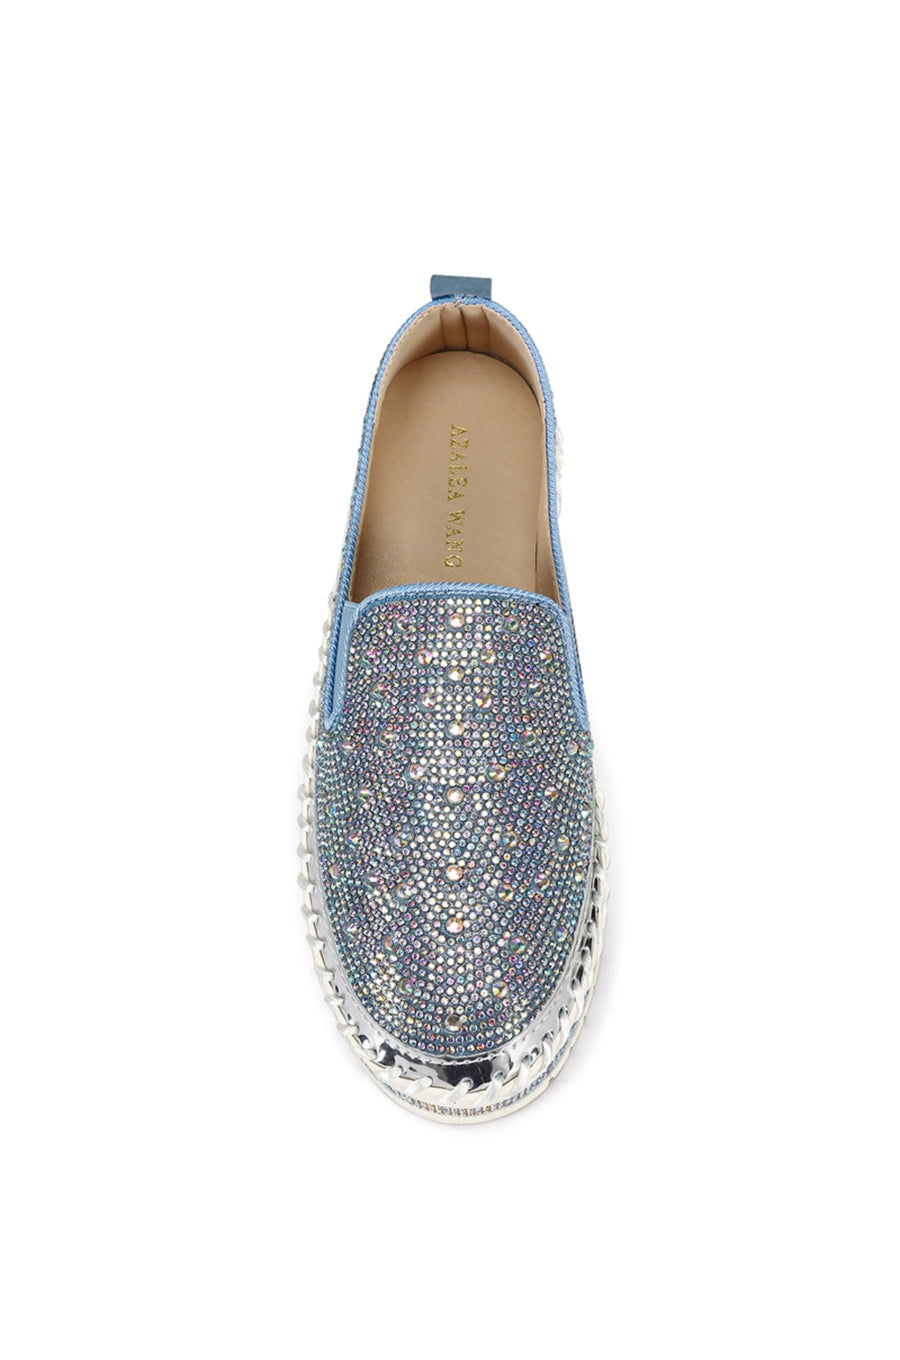 top view of slip on light wash denim flat sneakers with crystal rhinestone embellishments and a white braided platform sole